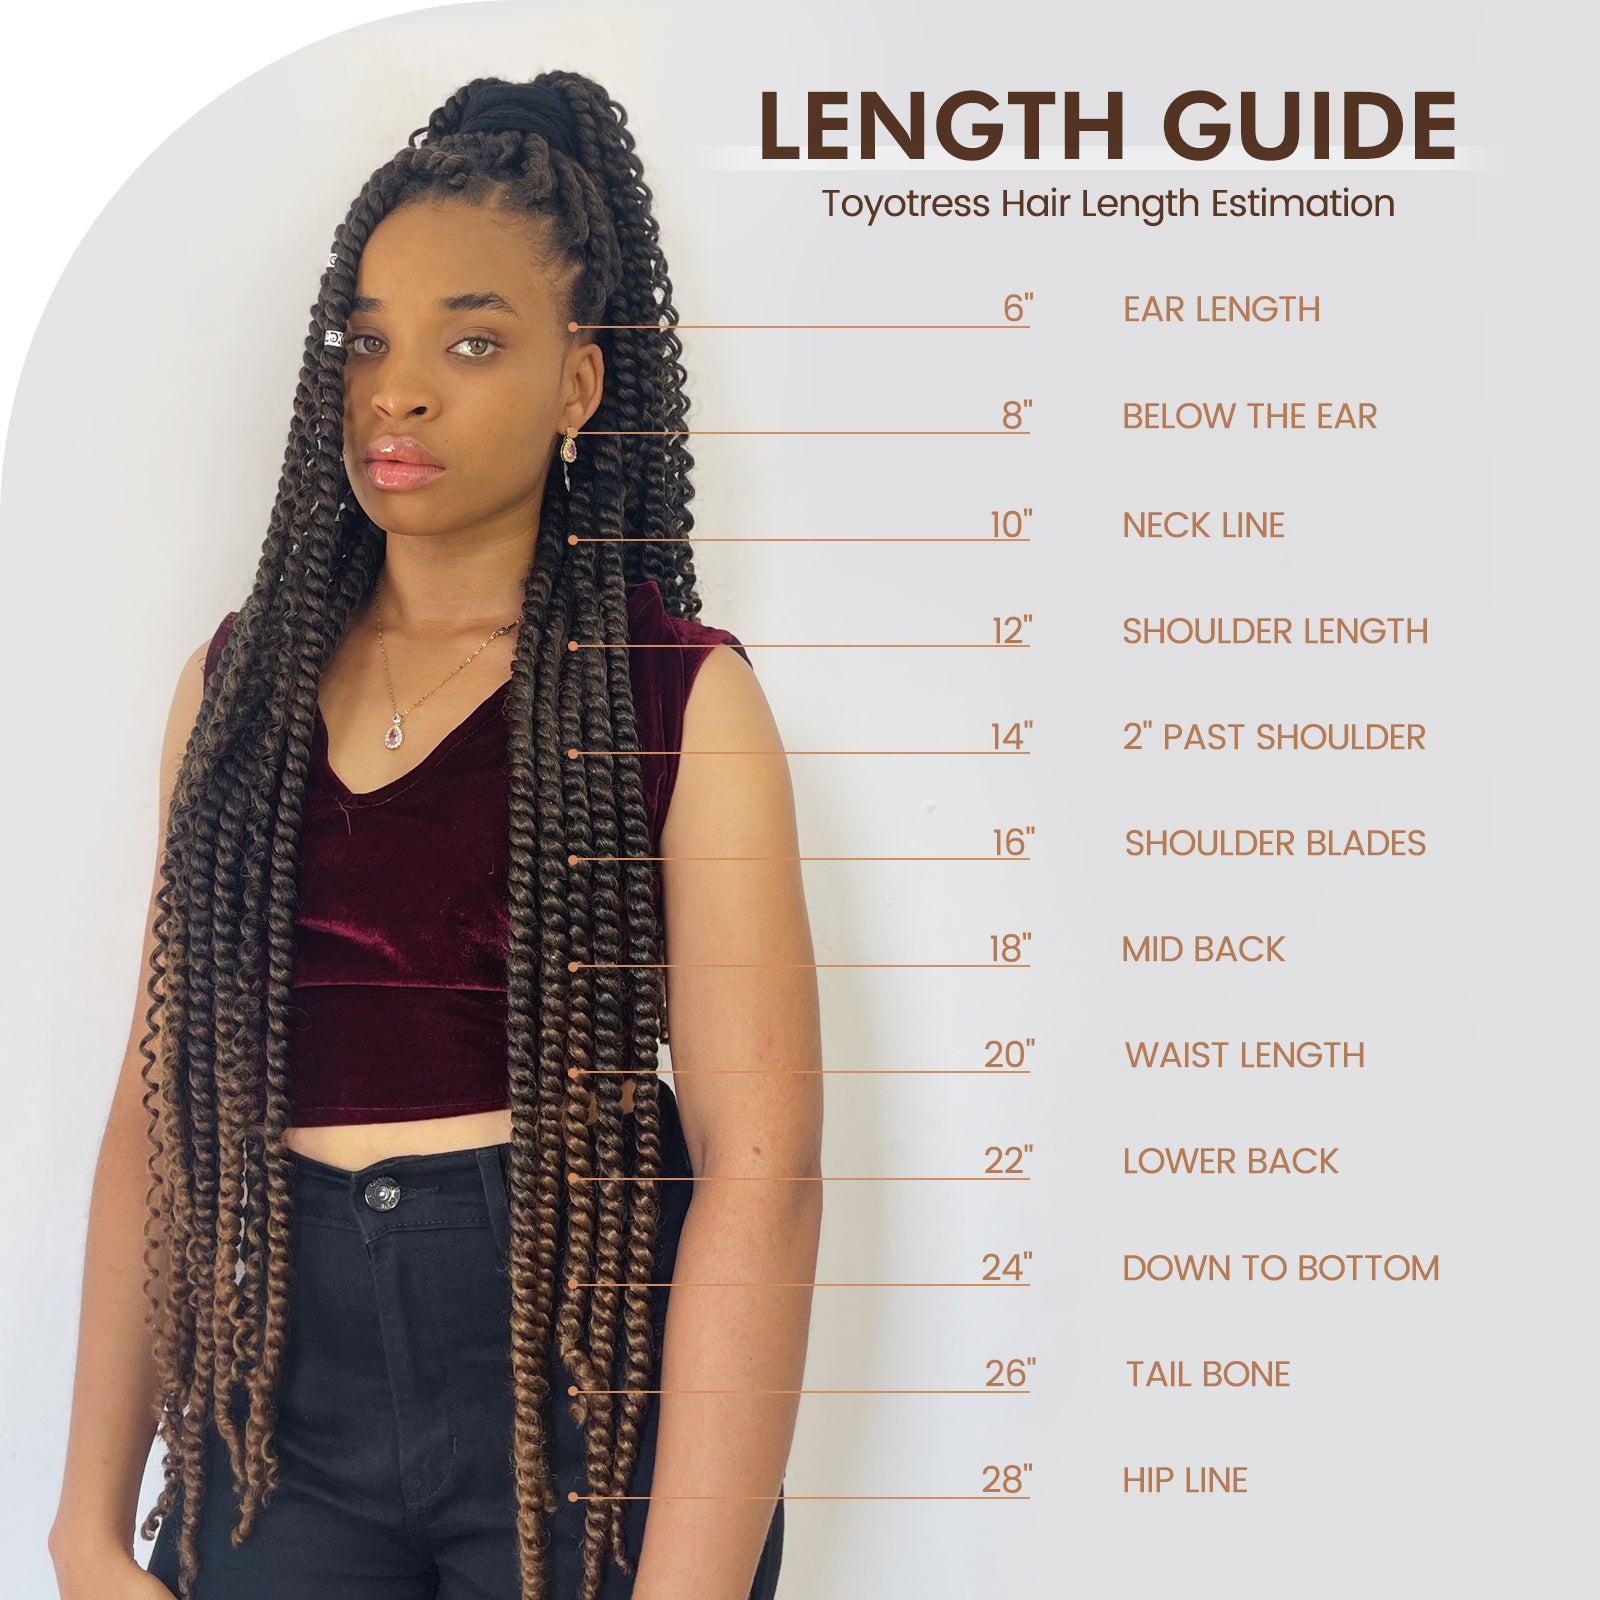 TOYOTRESS 8-16 Inch Yanky Twist 8 Packs | Yanky Twist Braiding Hair with Curls 8 Packs Fluffy Marlybob Crochet Hair Pre Twisted Short Passion Twist Crochet Braids Synthetic Hair Extensions for Women